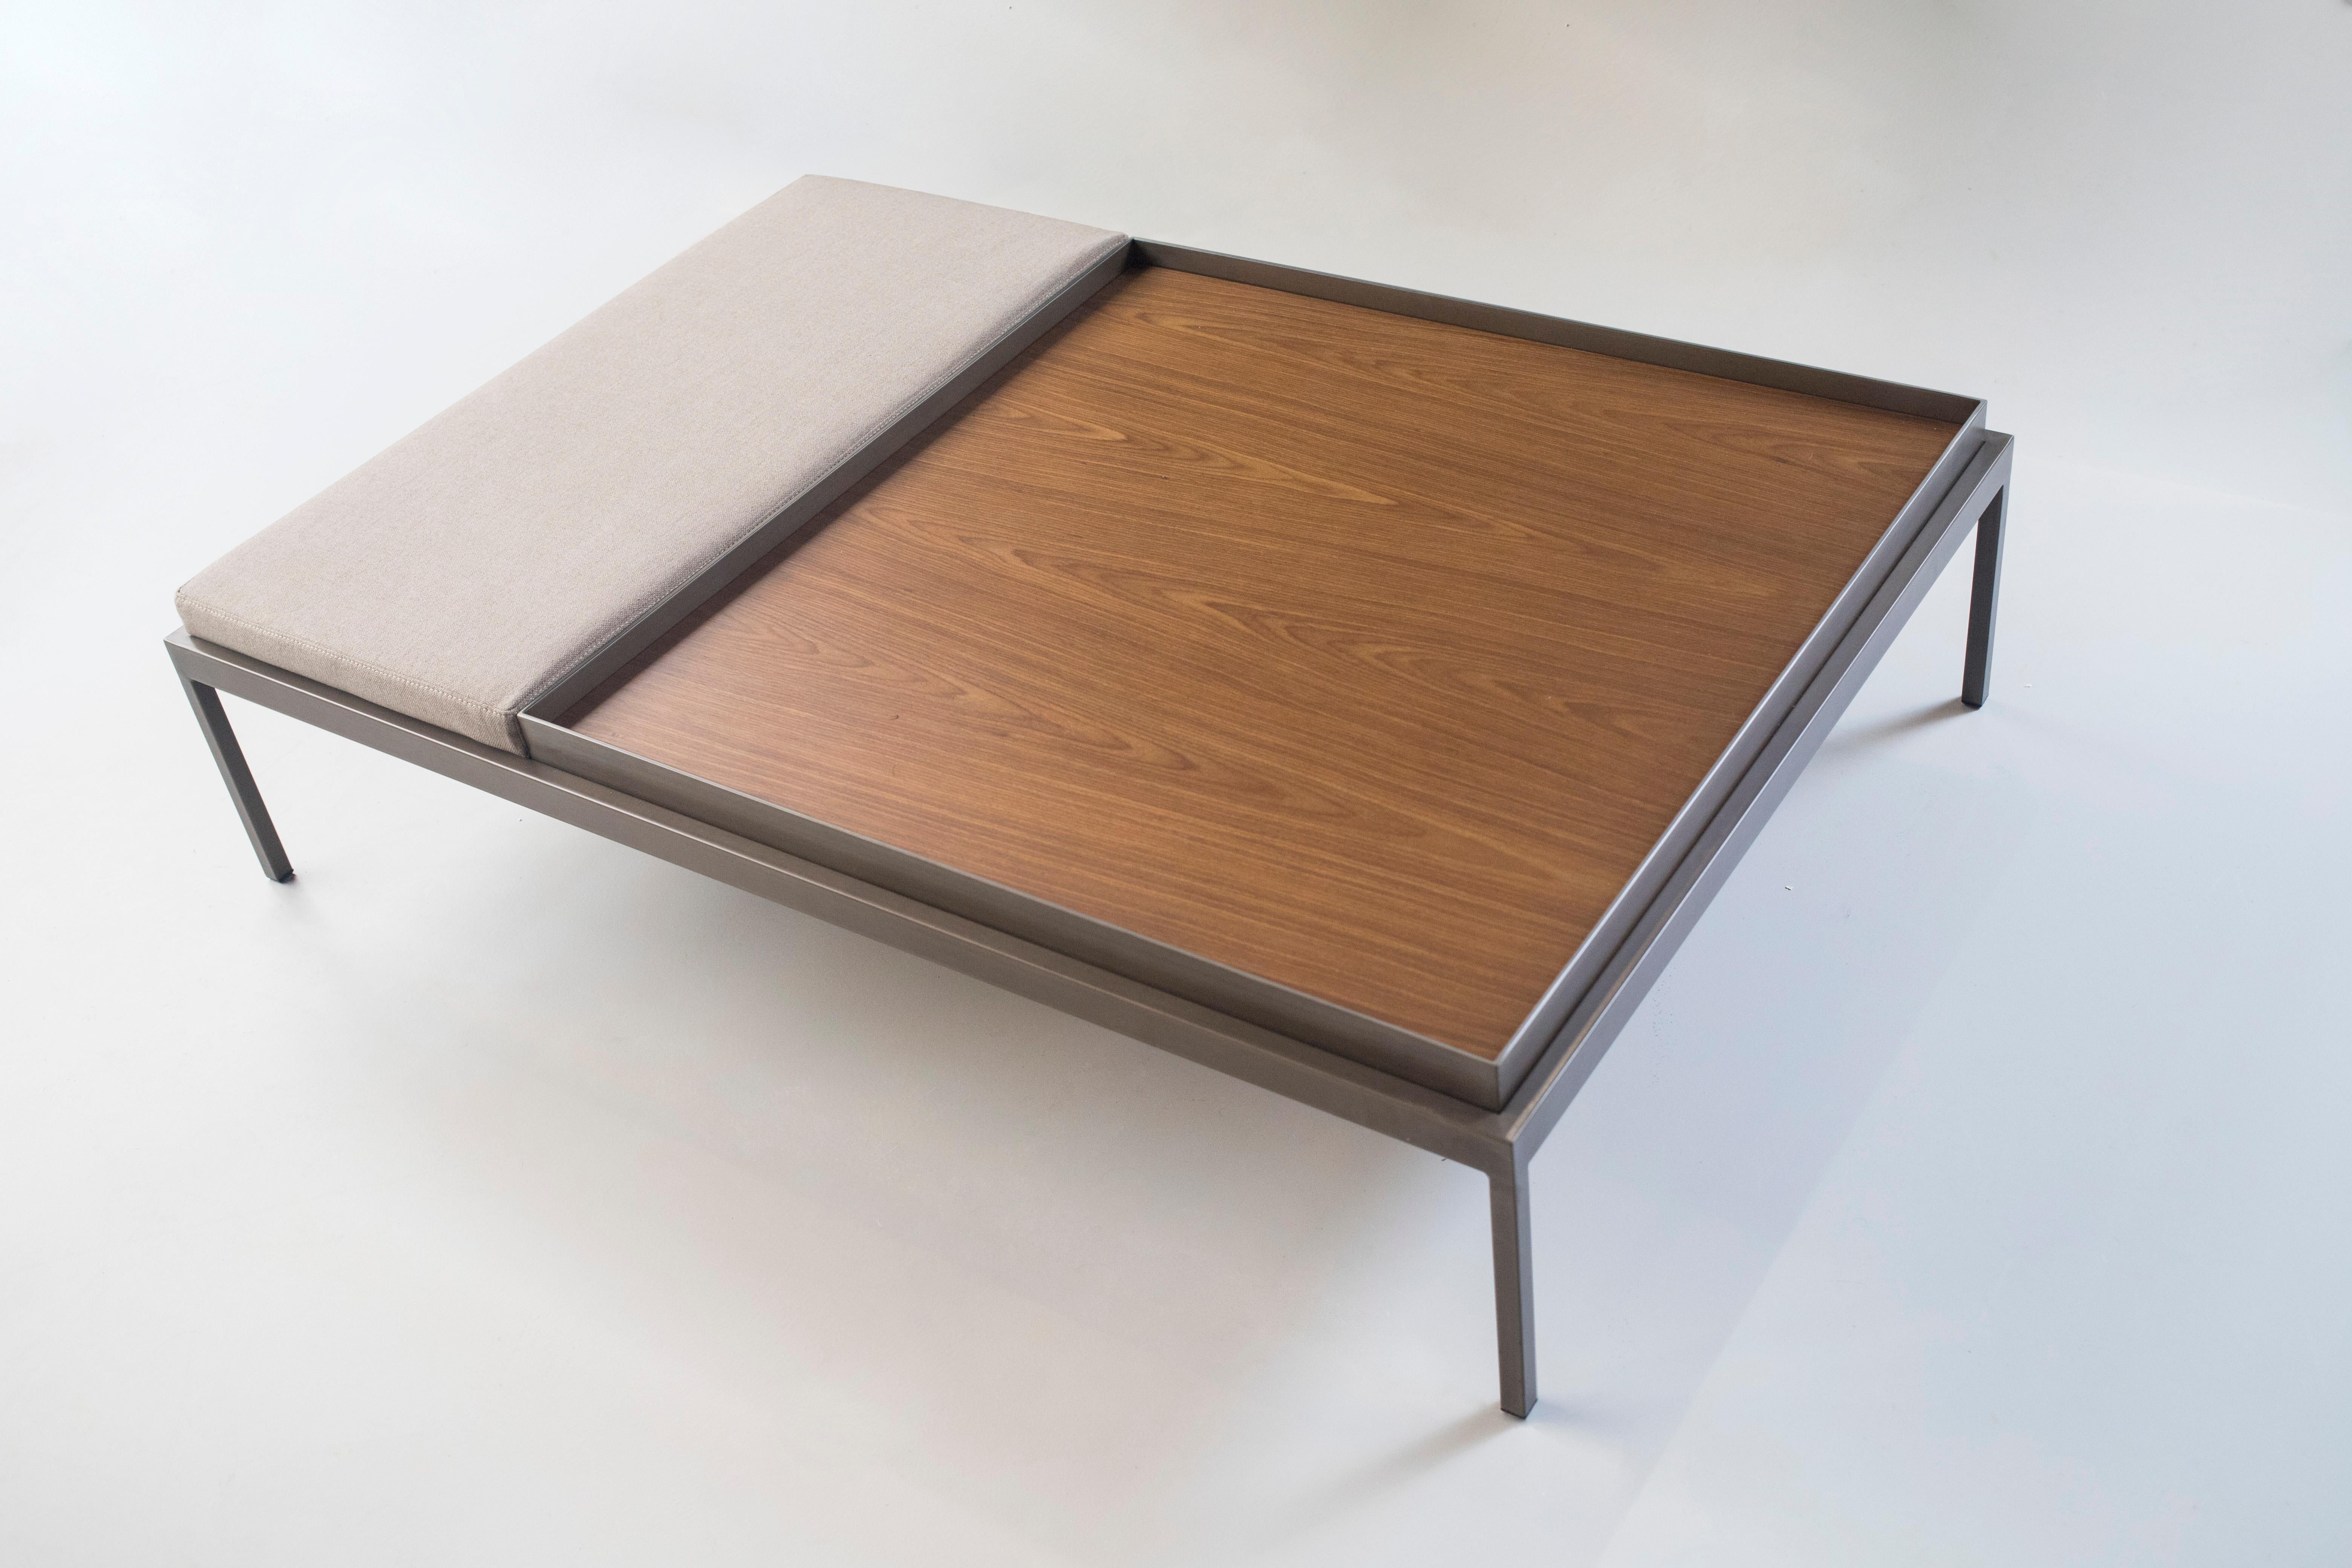 White Coffee Table by Doimo Brasil
Dimensions:  W 140 x D 95 x H 34 cm 
Materials: Base: Paint, Seat: Fabric, Top: Veneer.


With the intention of providing good taste and personality, Doimo deciphers trends and follows the evolution of man and his